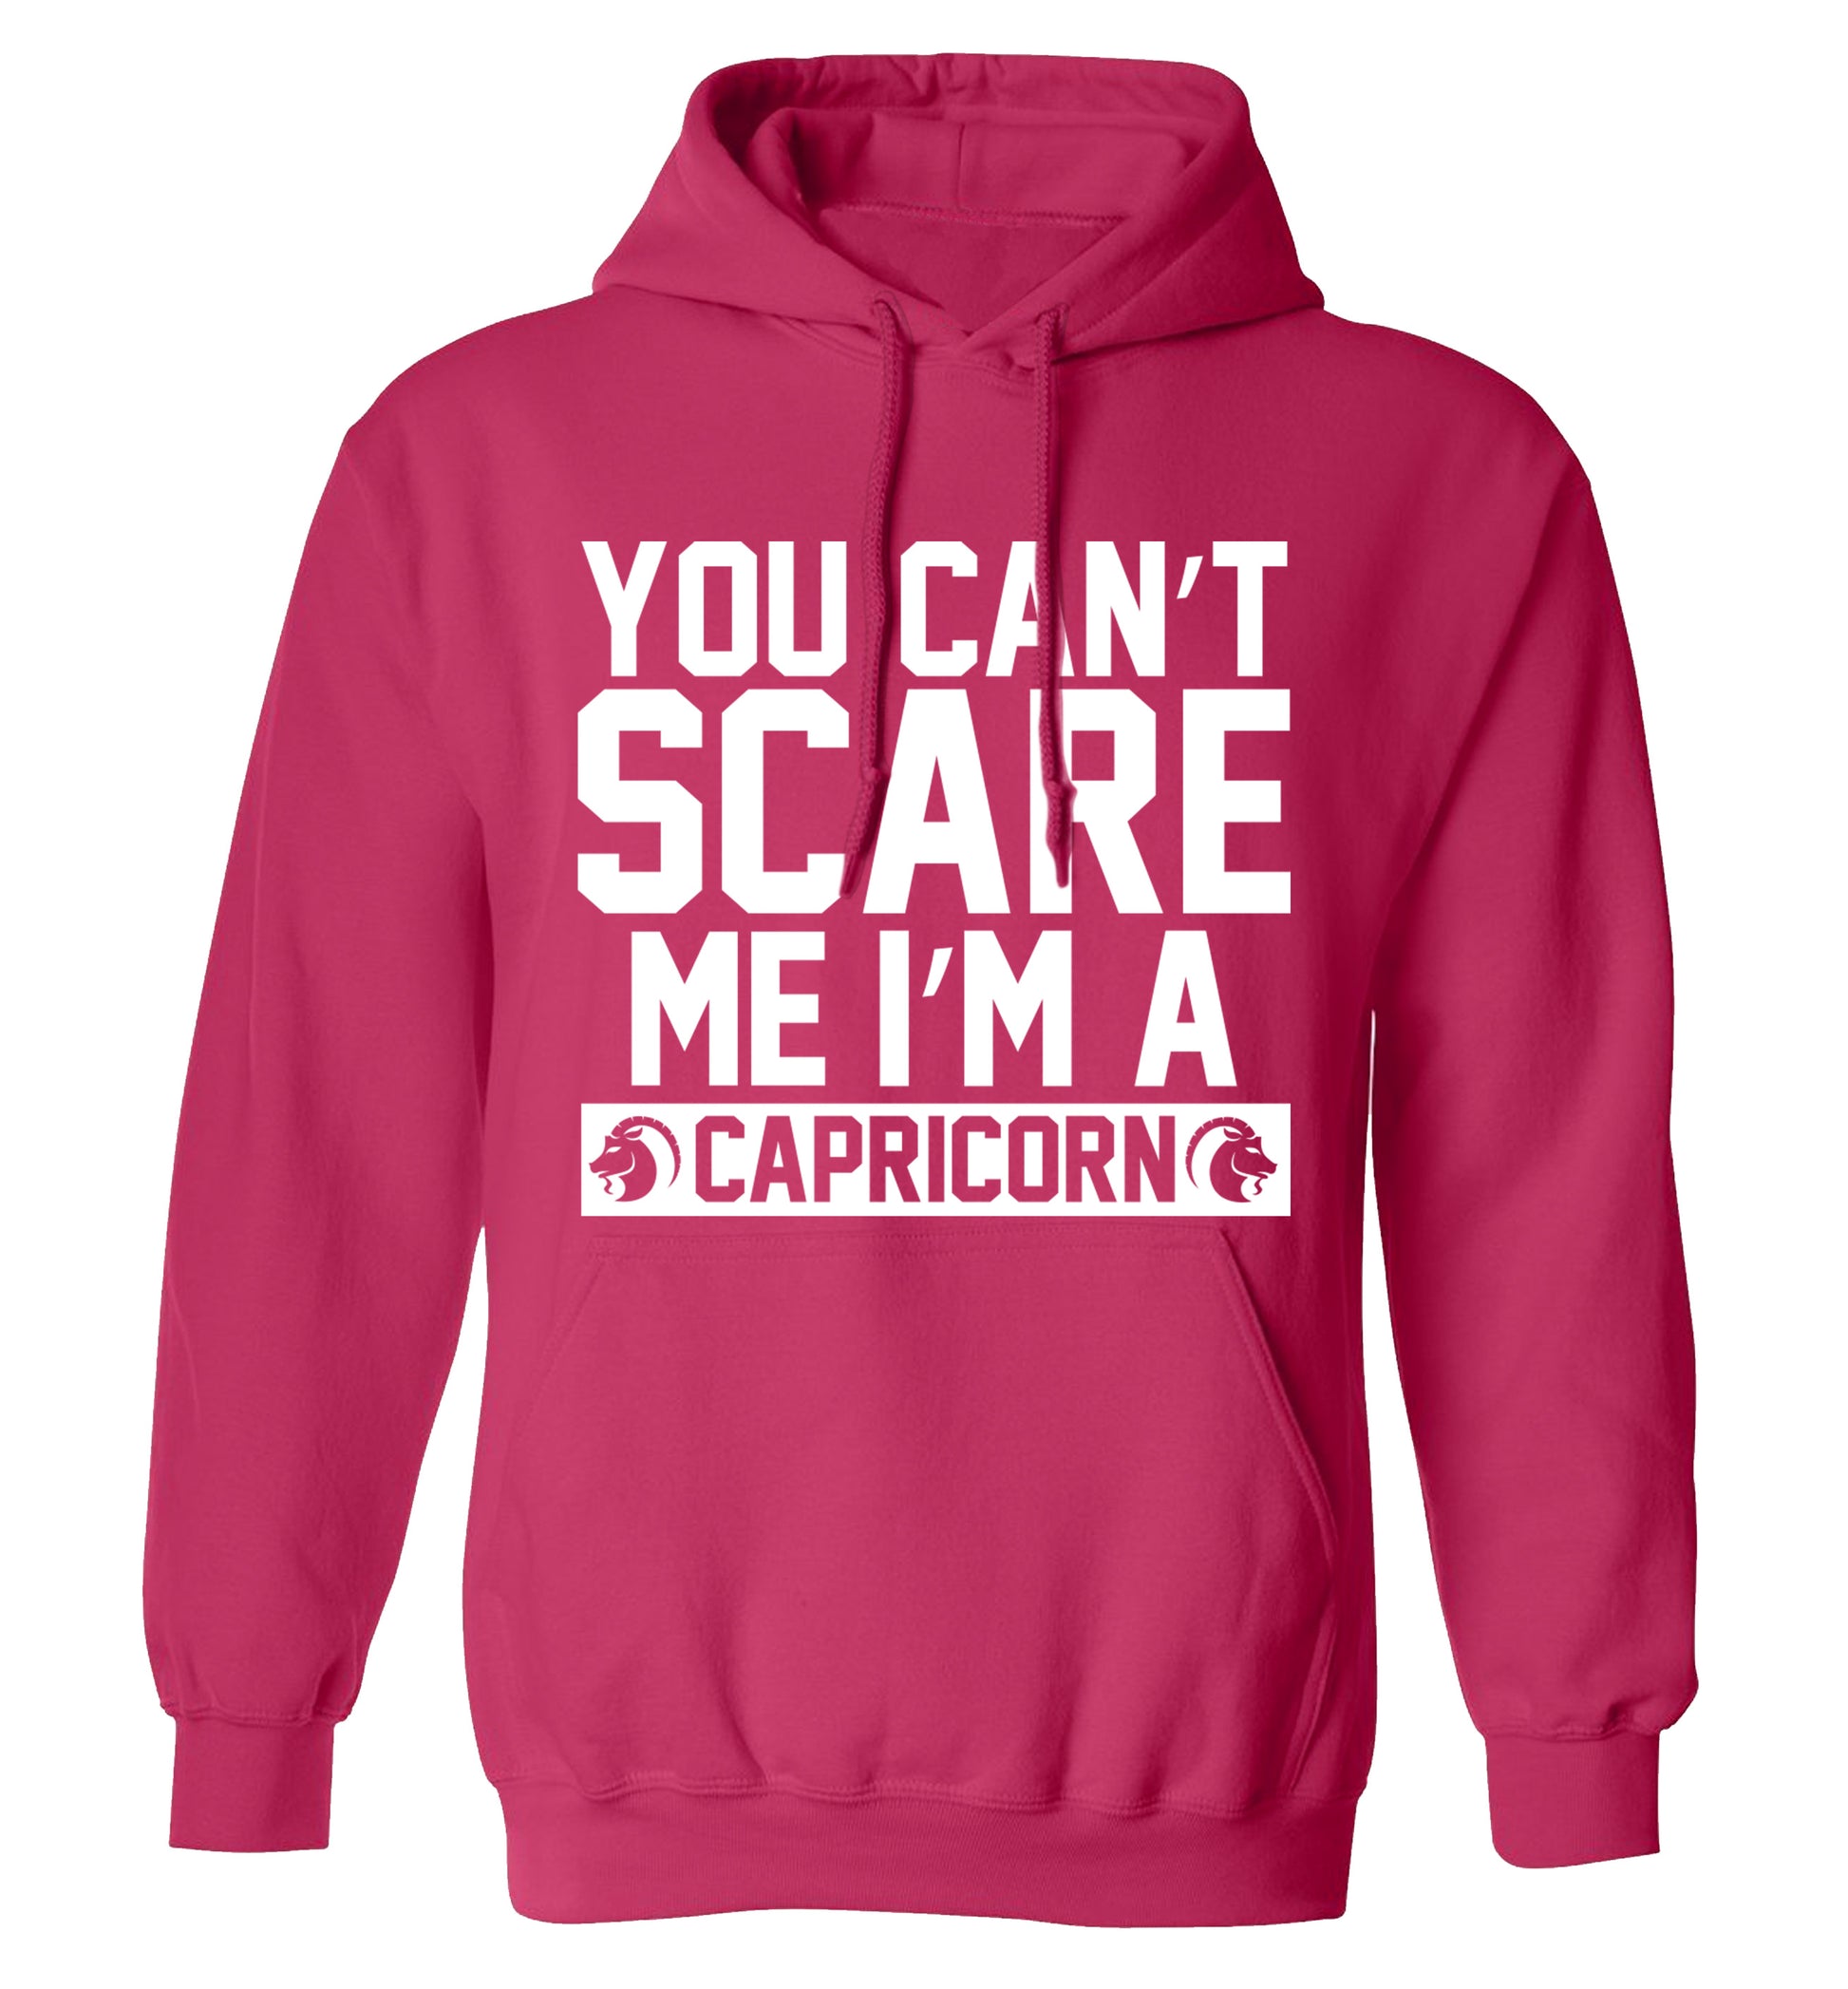 You can't scare me I'm a capricorn adults unisex pink hoodie 2XL